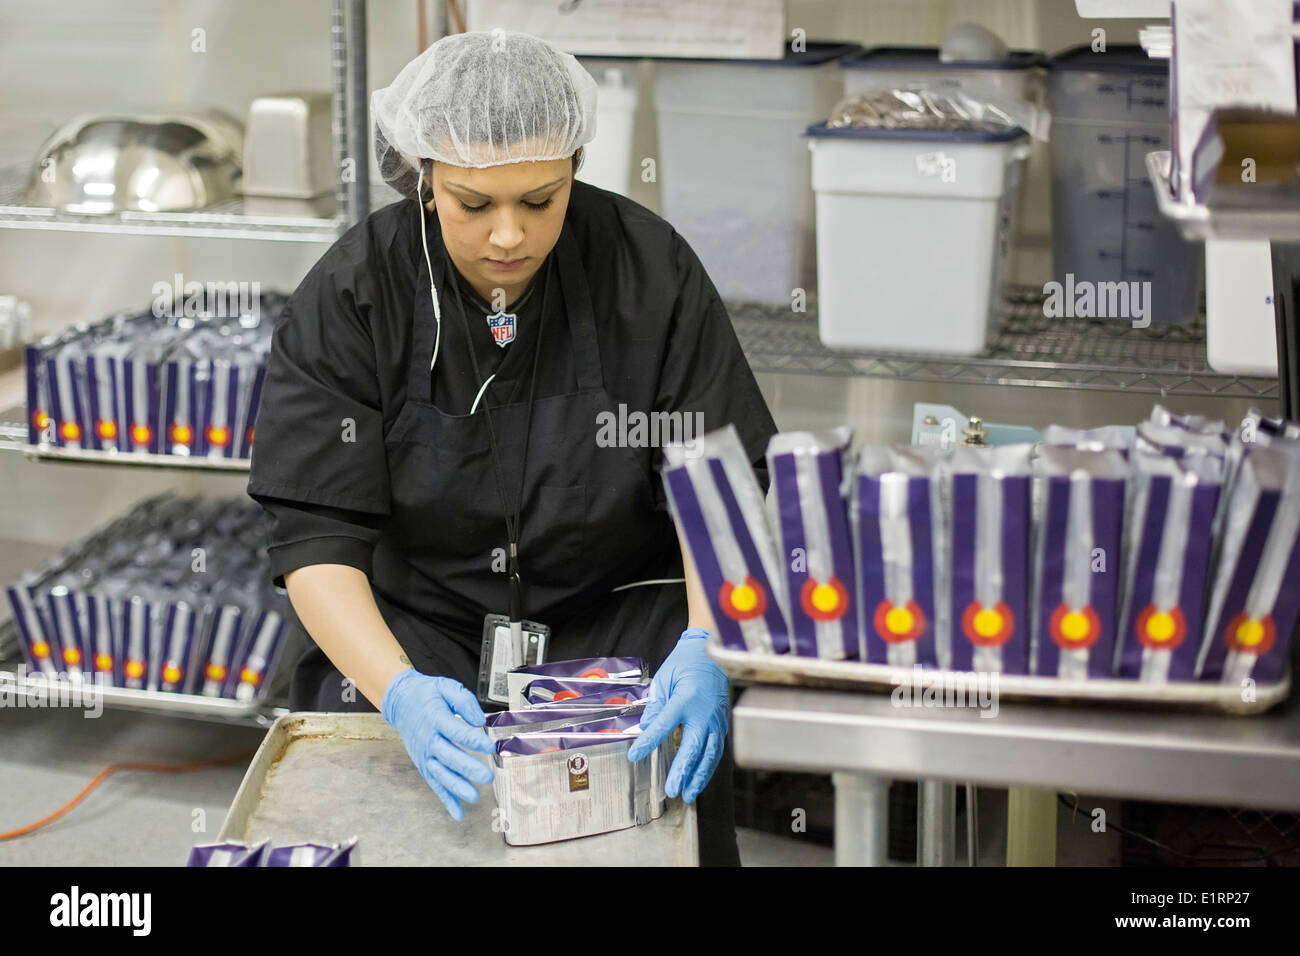 Denver, Colorado - A worker at Dixie Elixirs packages Colorado Bars, a marijuana edible product. Stock Photo